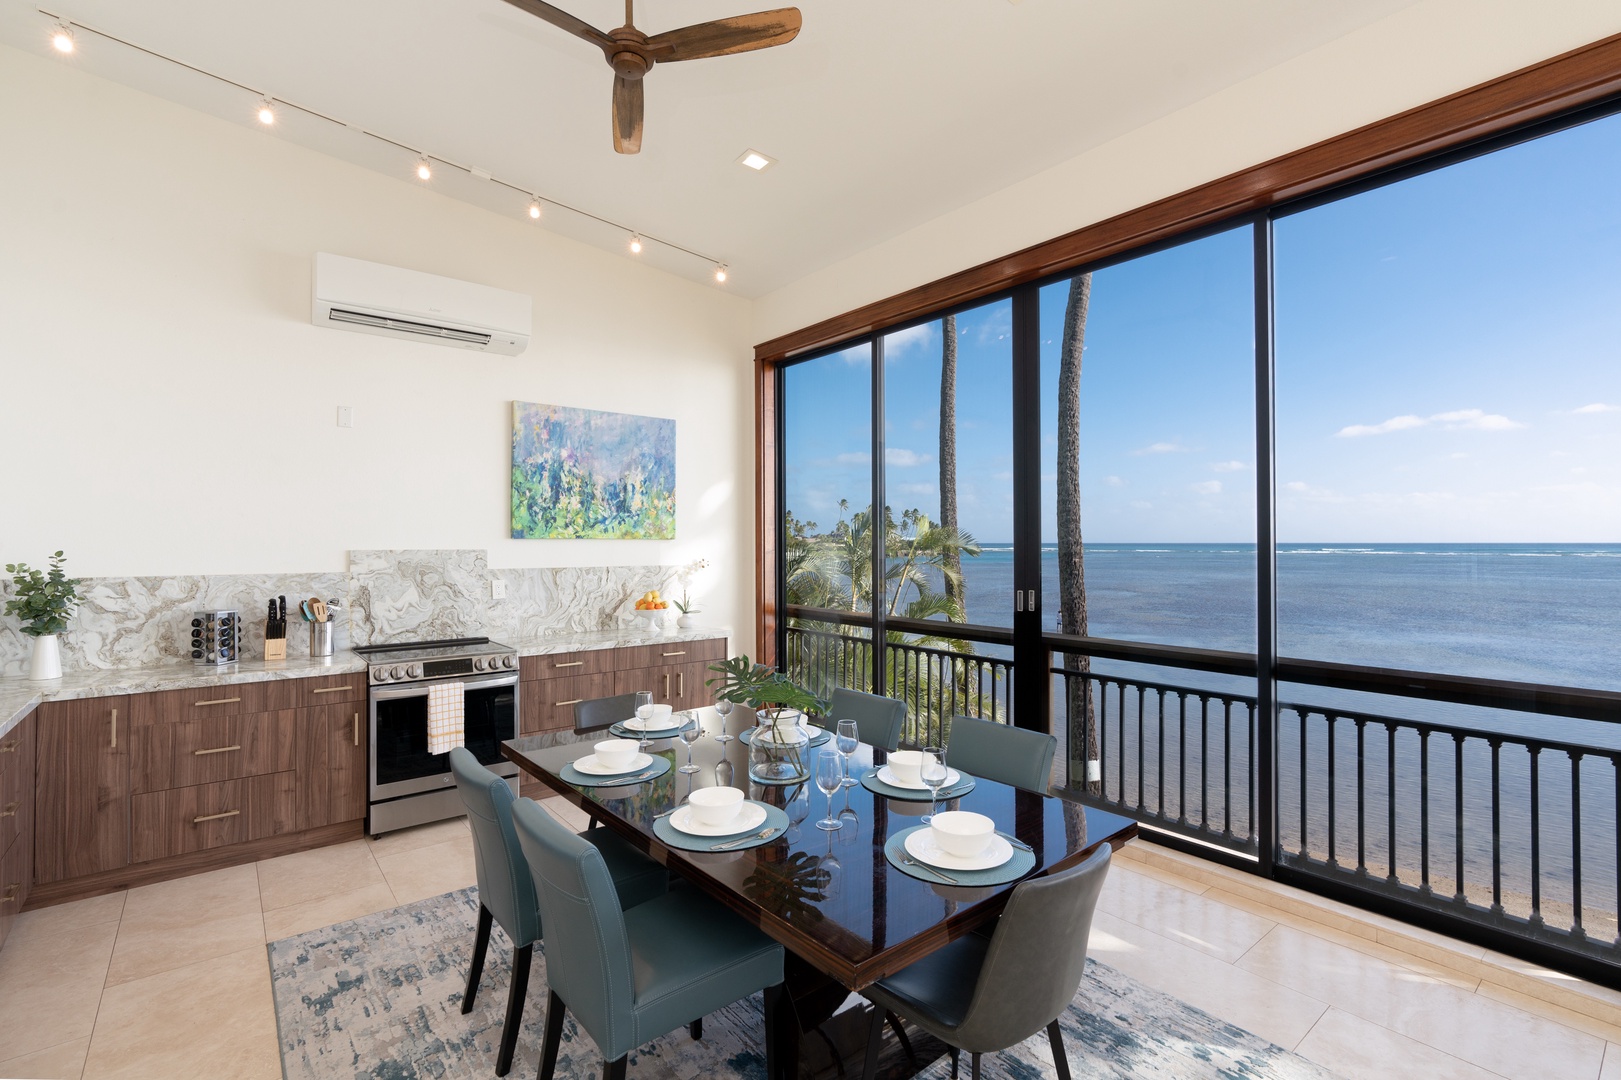 Honolulu Vacation Rentals, Wailupe Seaside - Open concept dining and kitchen with views.